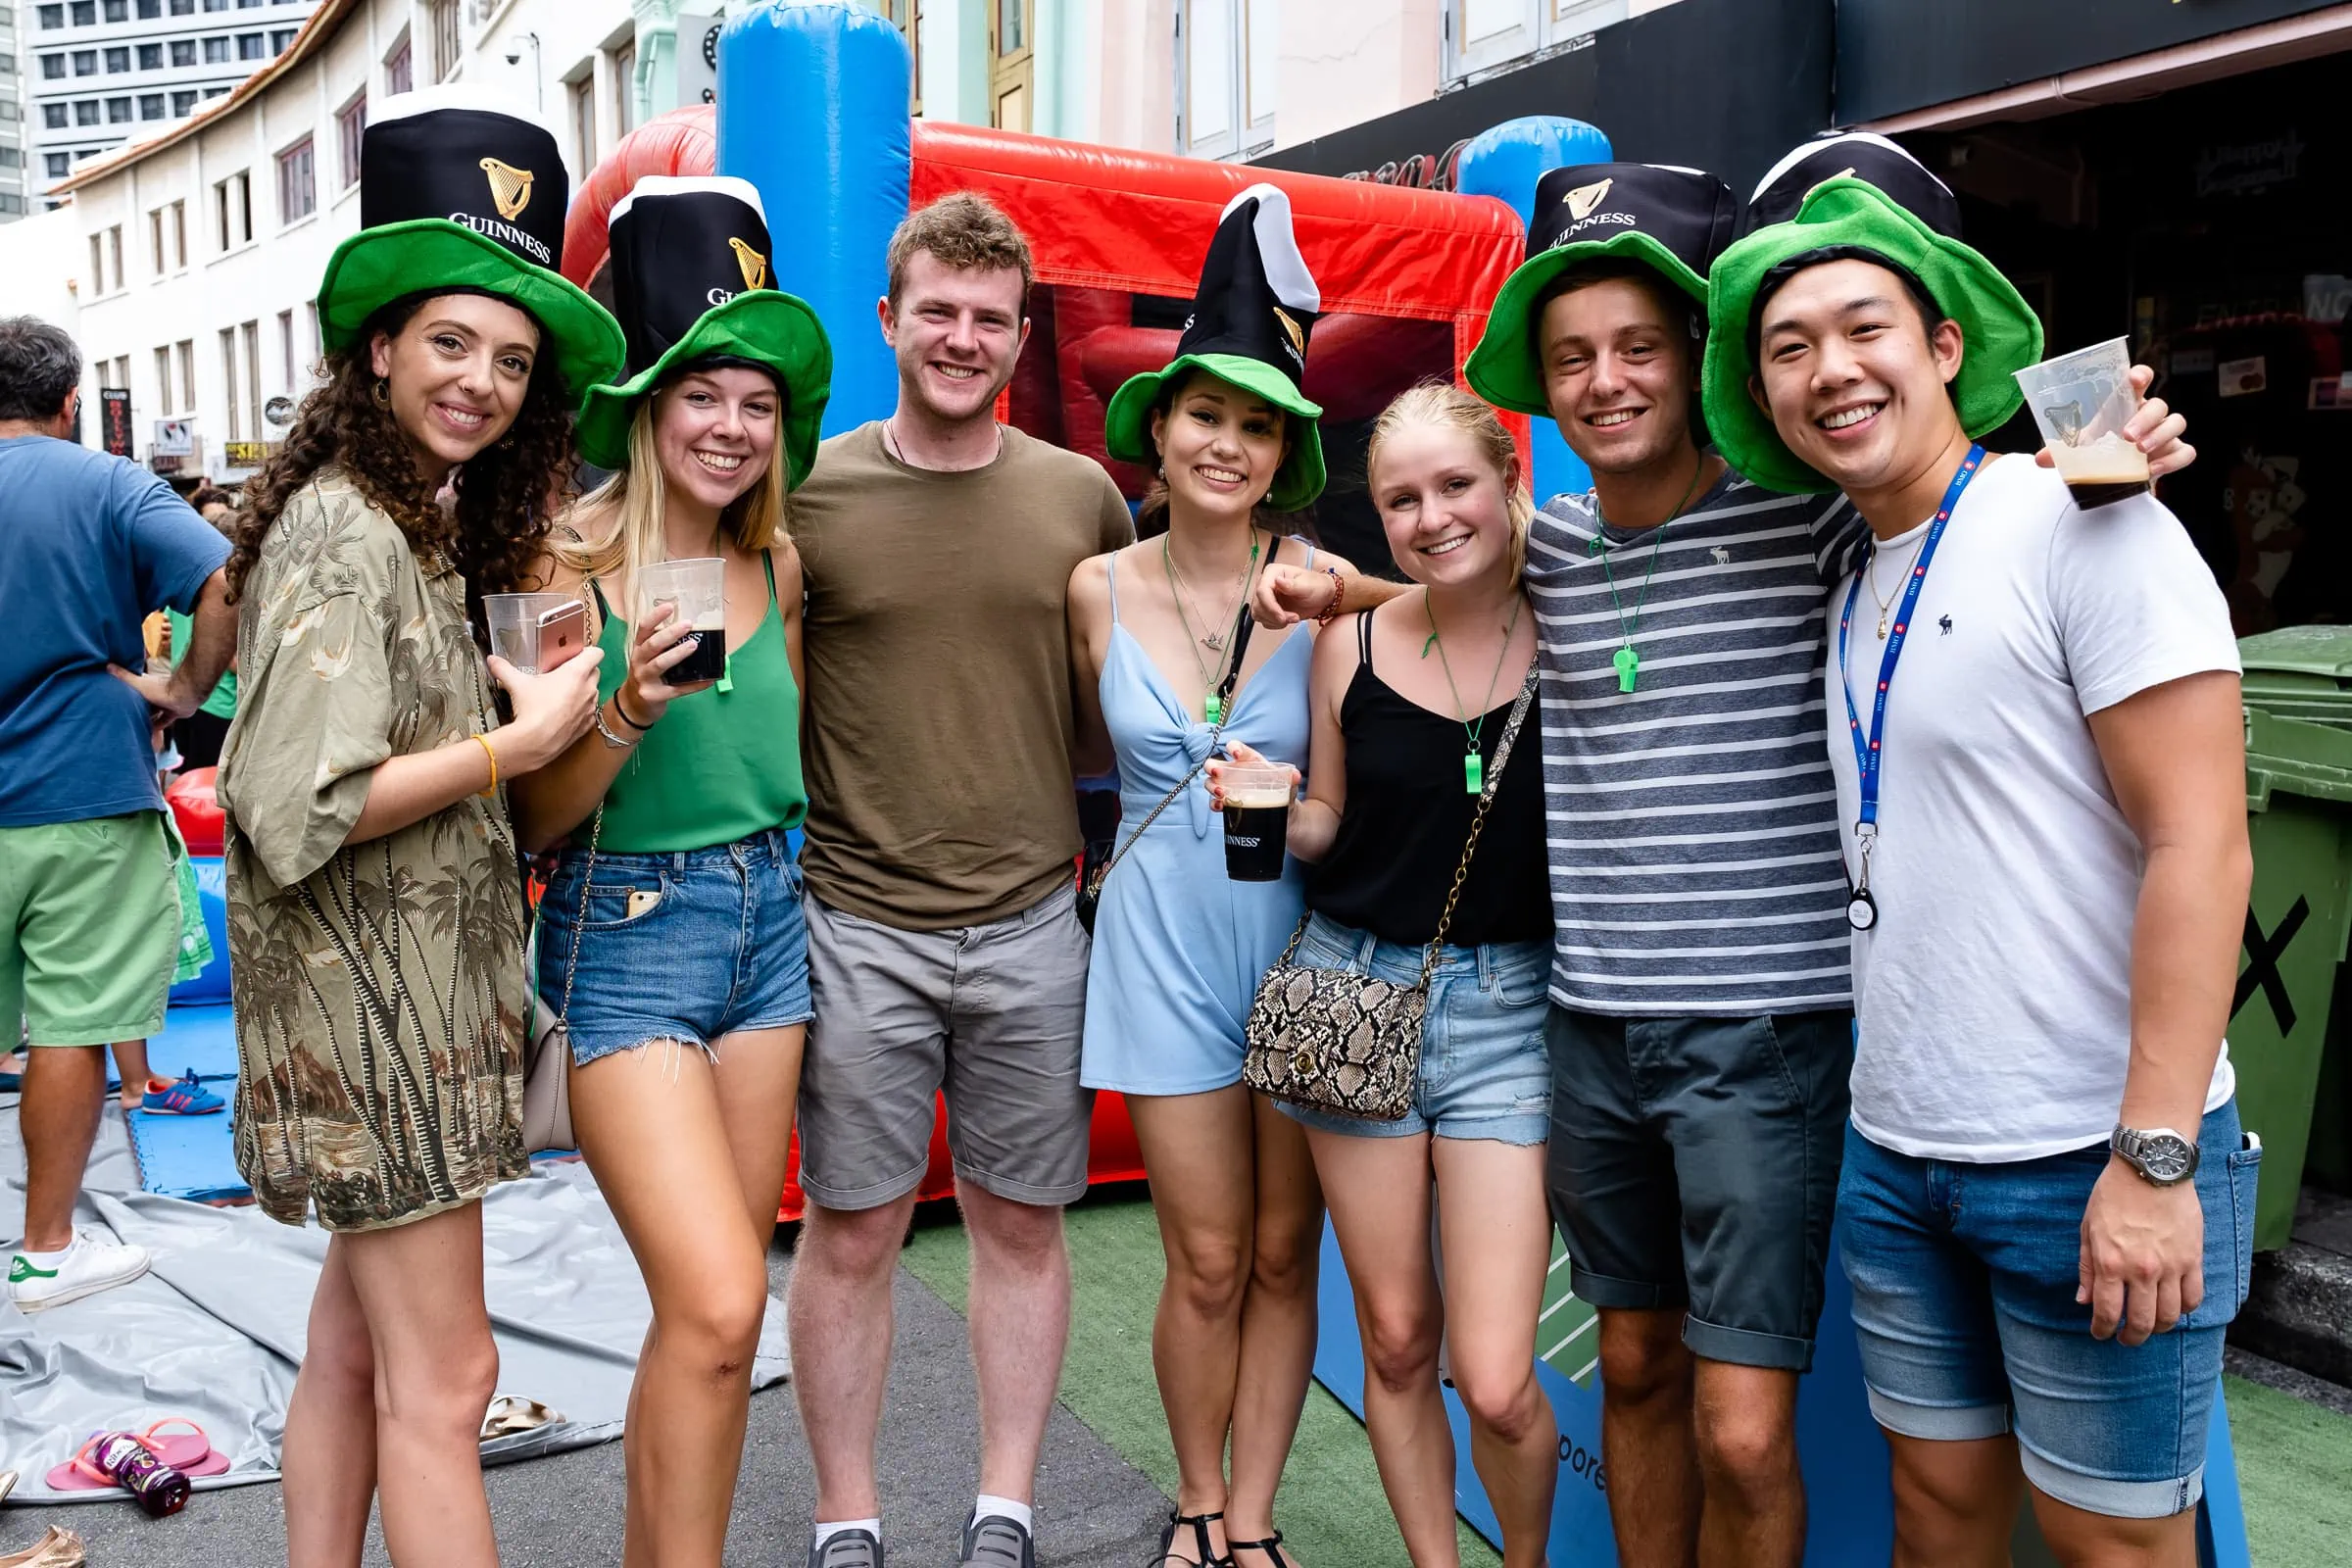 St Patrick’s Day Street Festival returns to Boat Quay with free pints of Guinness, live entertainment, hearty Irish pub grub, and exclusive merch to be won